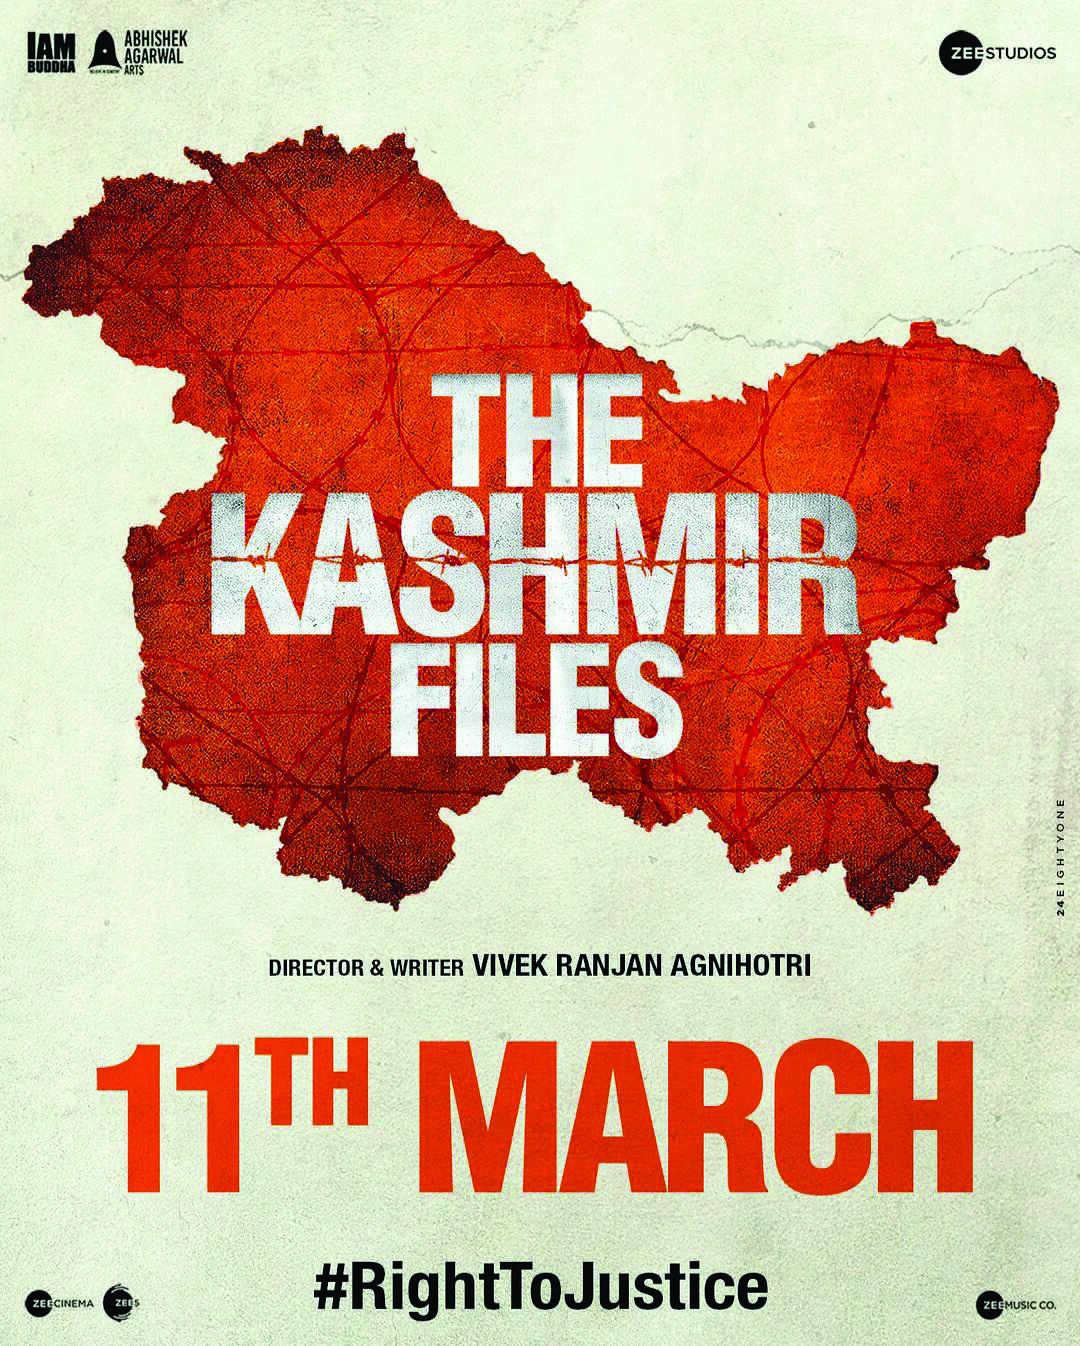 The Kashmir Files set to release on March 11, 2022